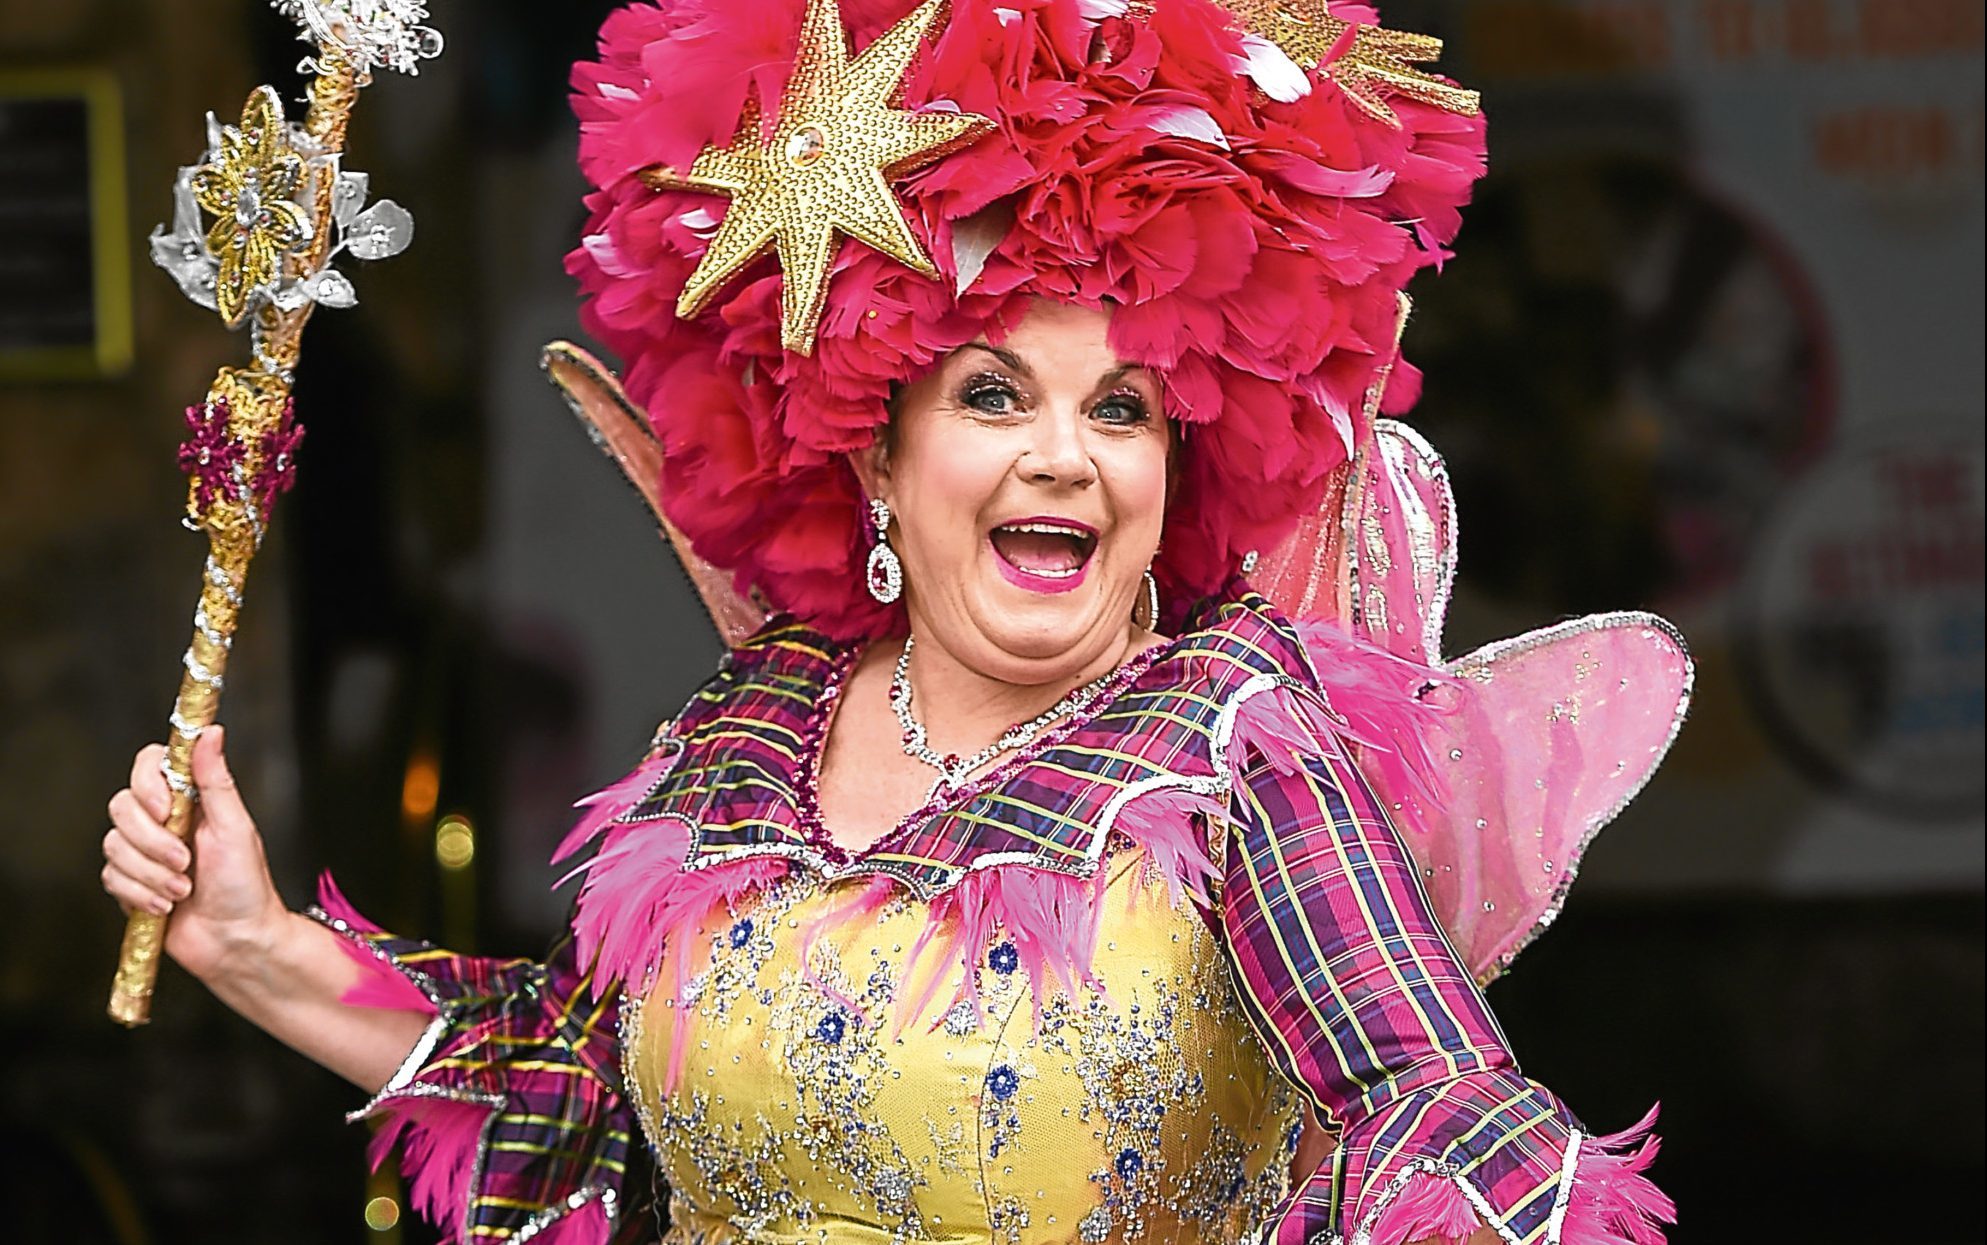 Elaine C Smith stars in this year's pantomime, Sleeping Beauty